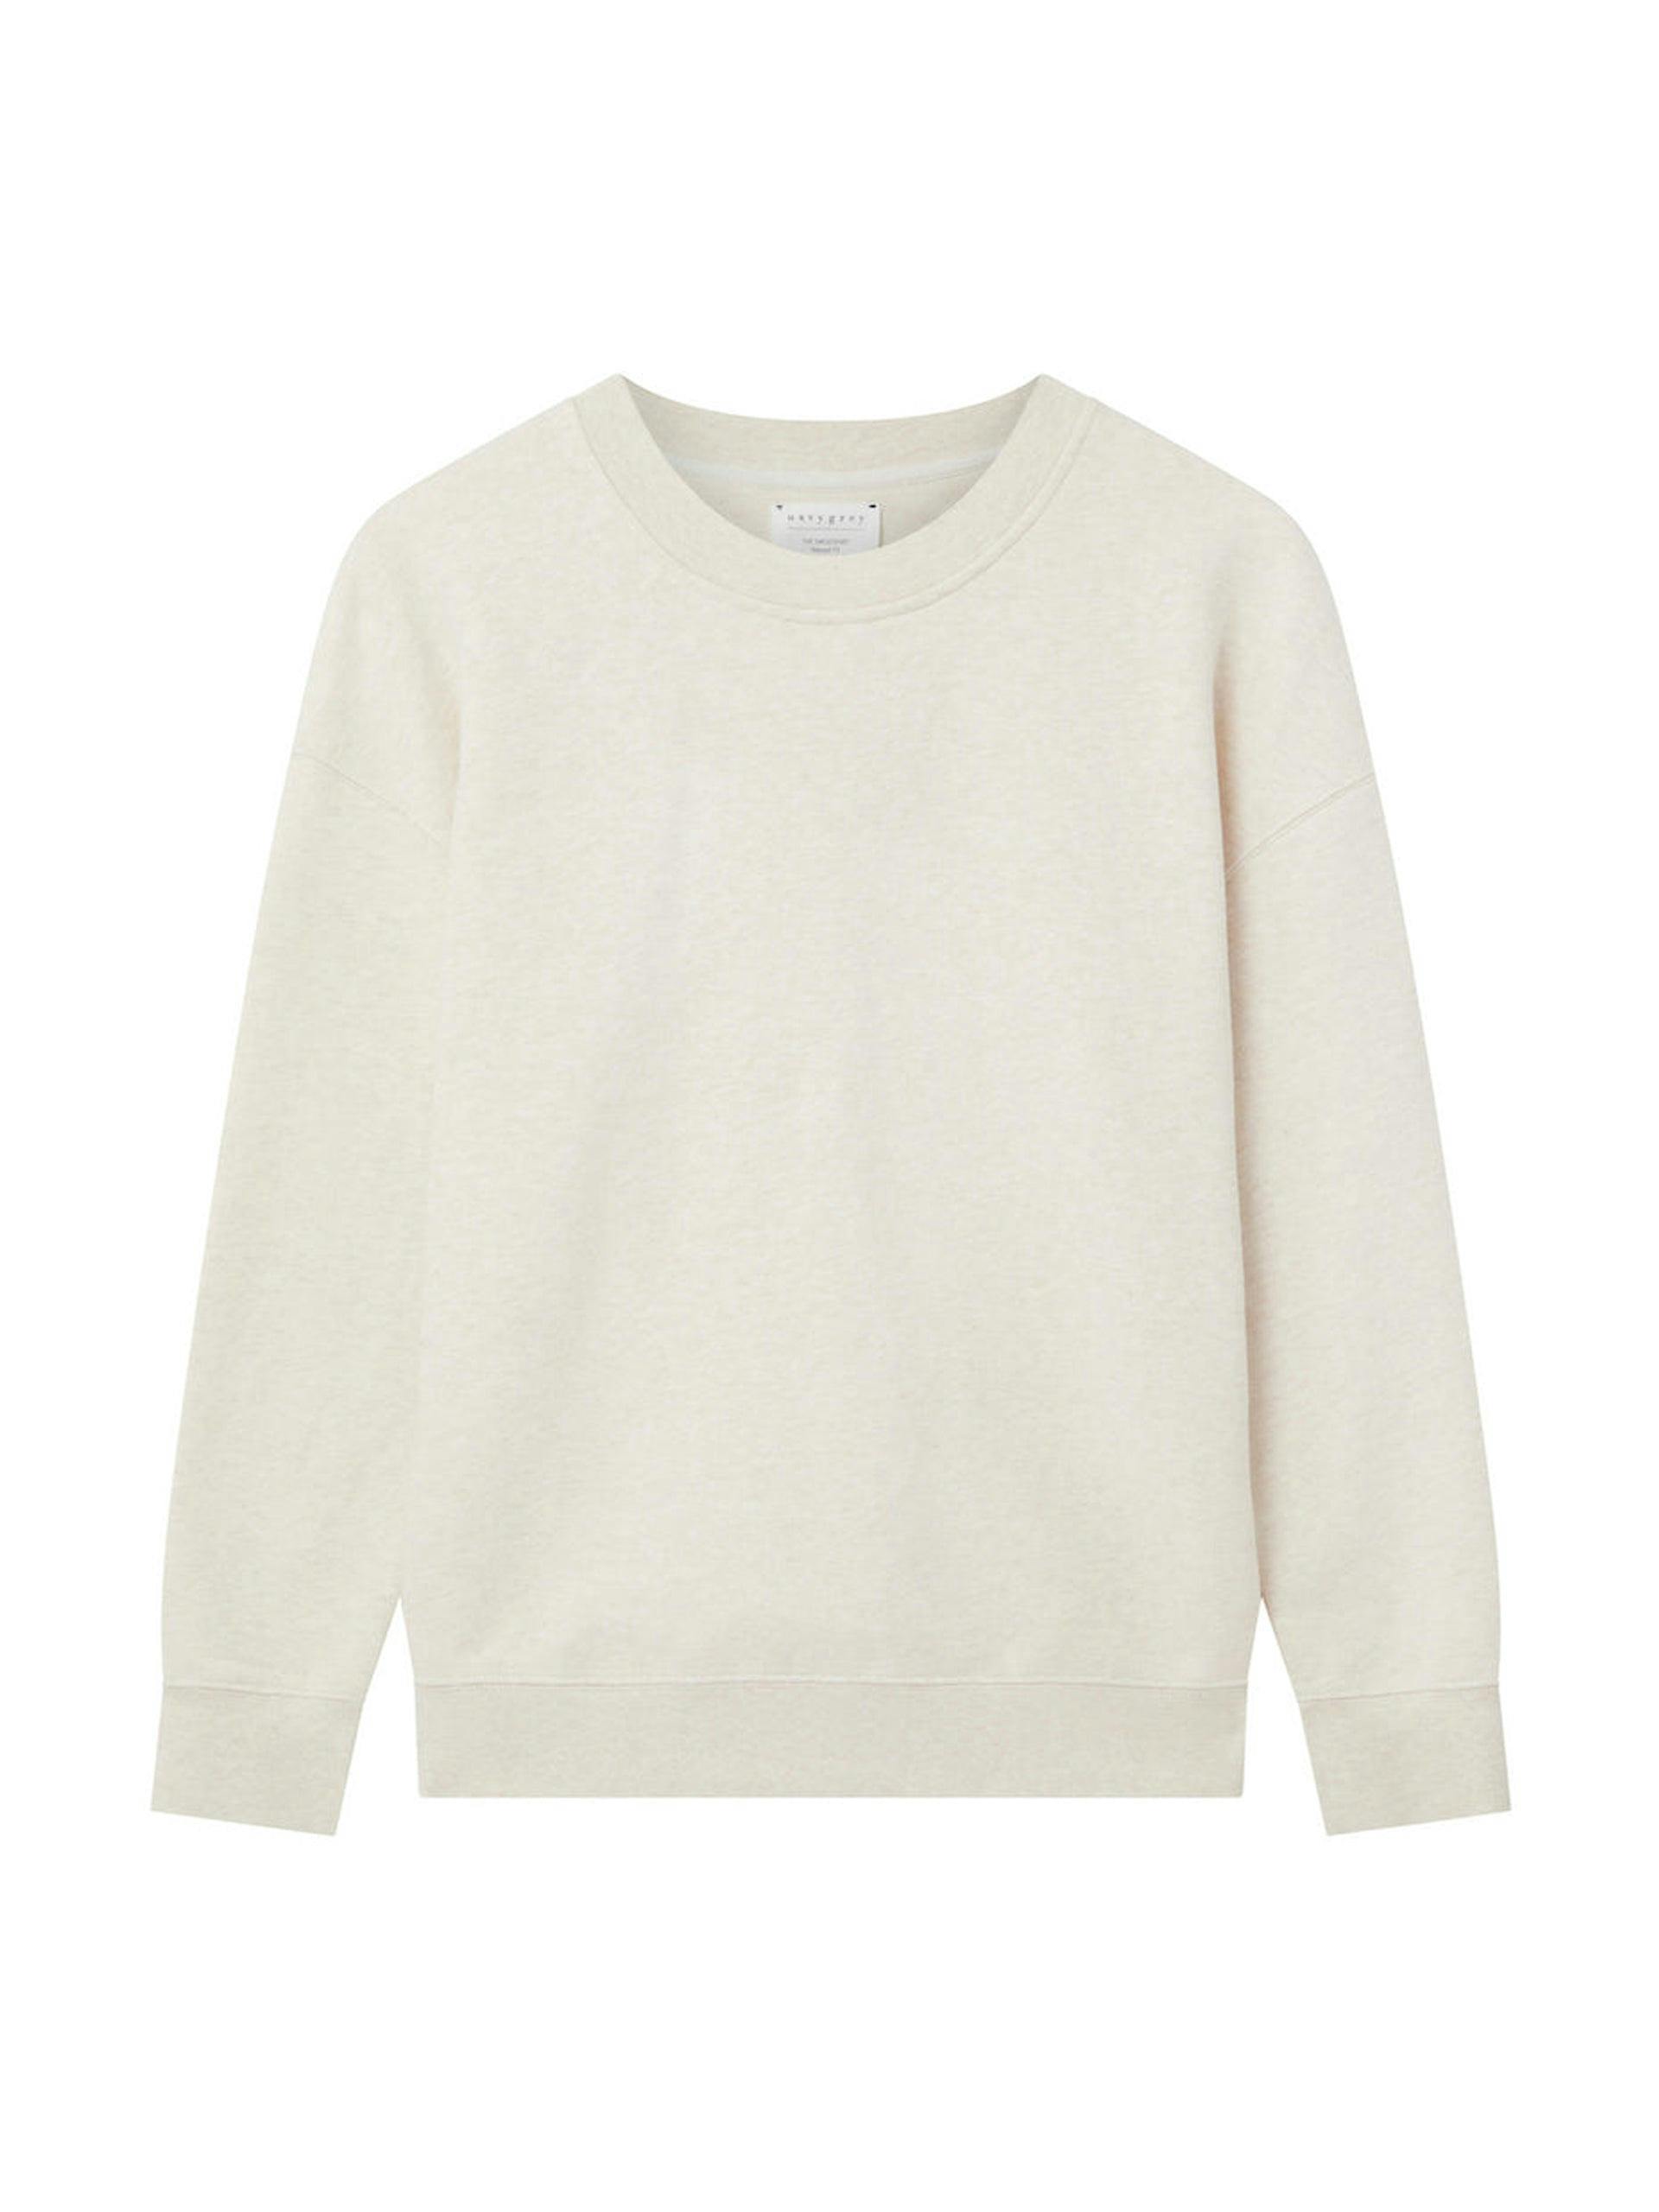 The Relaxed-fit sweatshirt in seashell